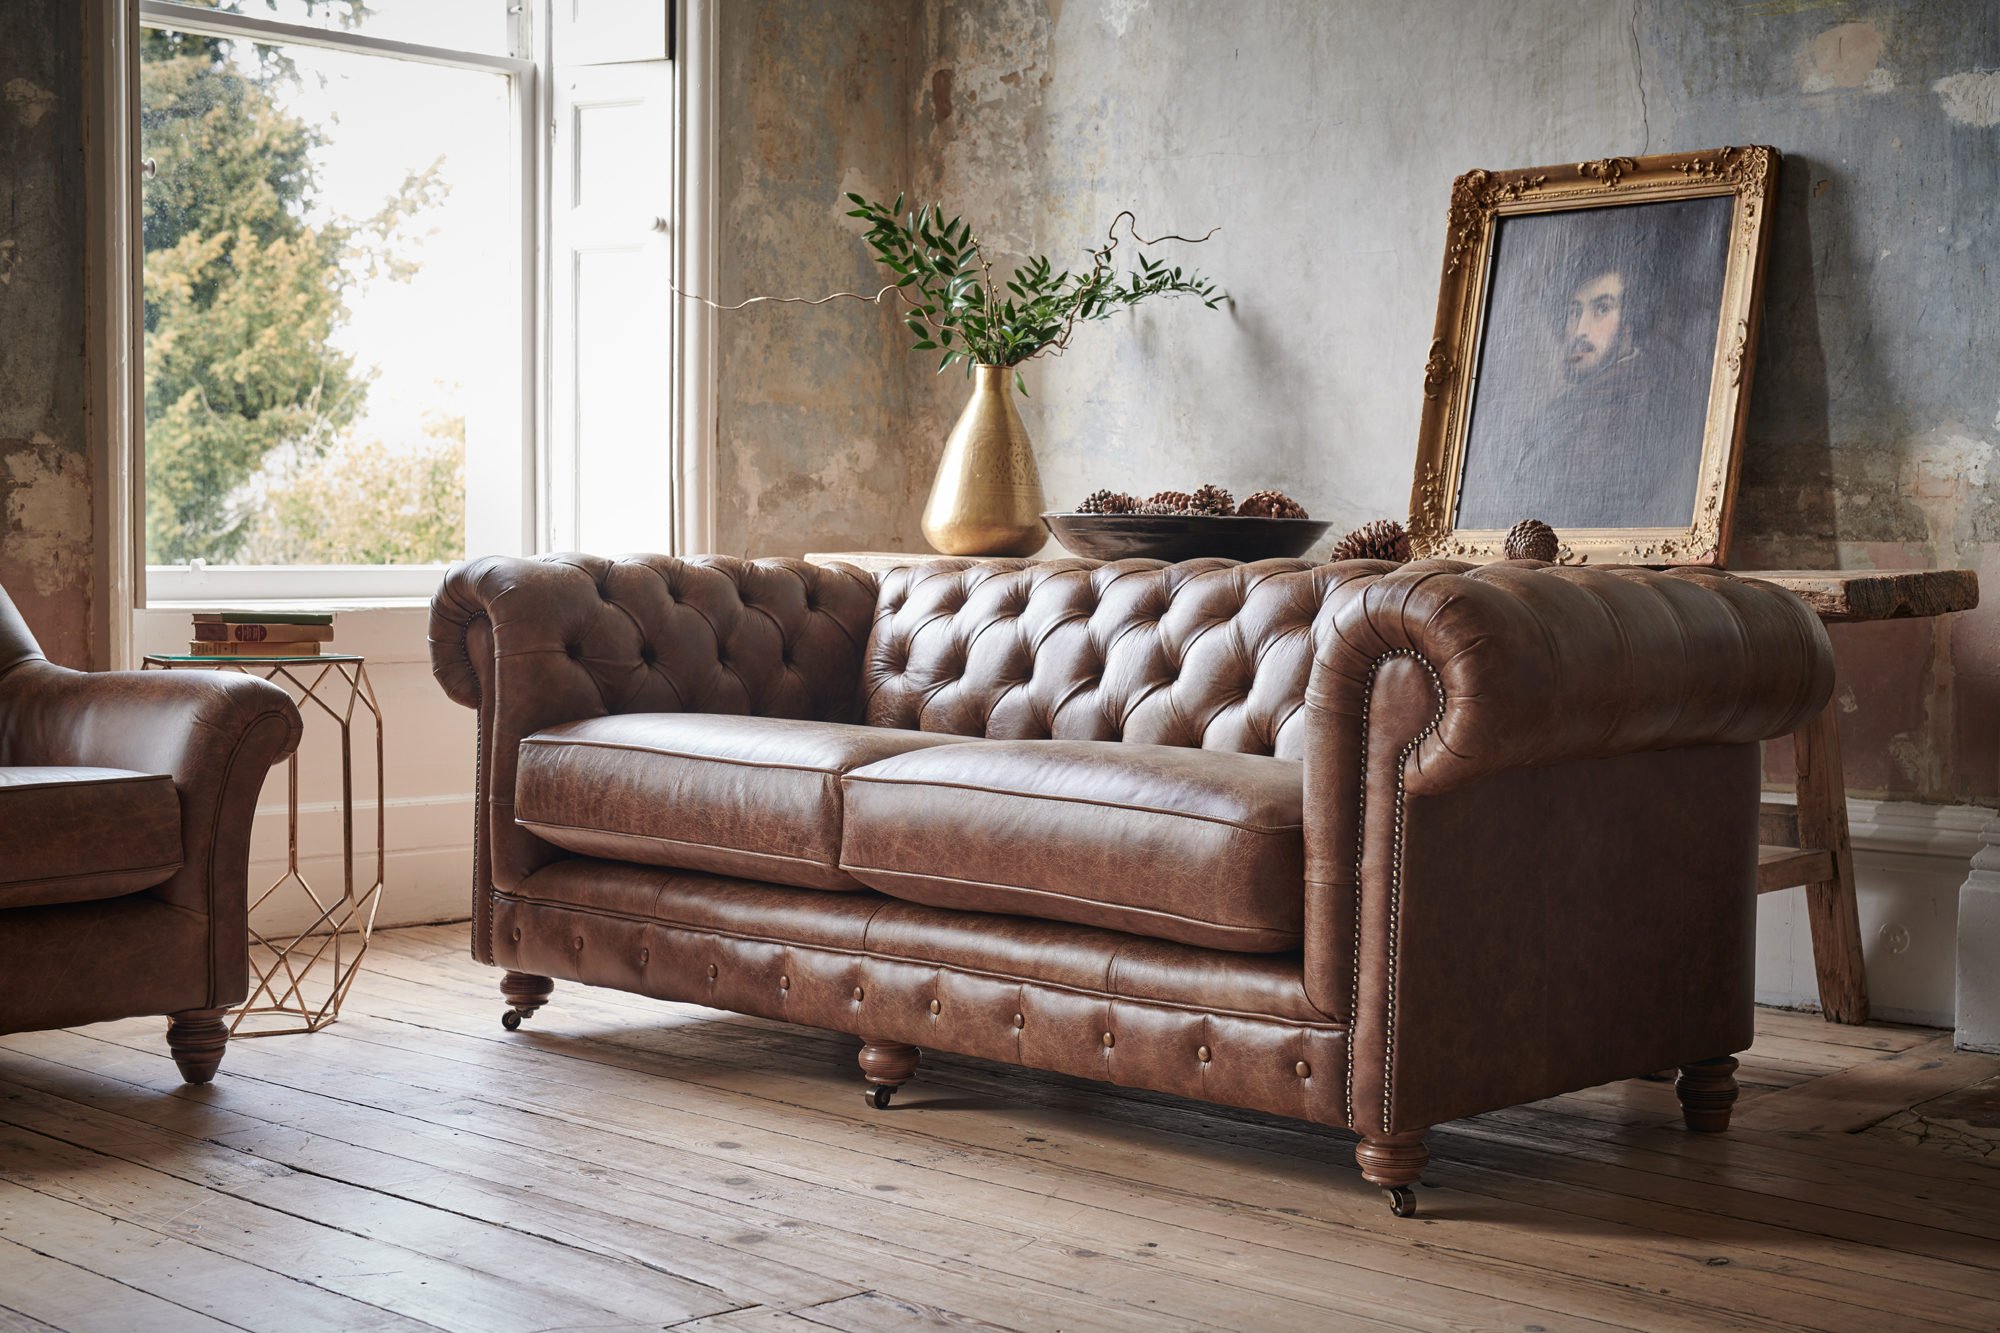 Chesterfield Leather Sofa, Leather Chesterfield Couch